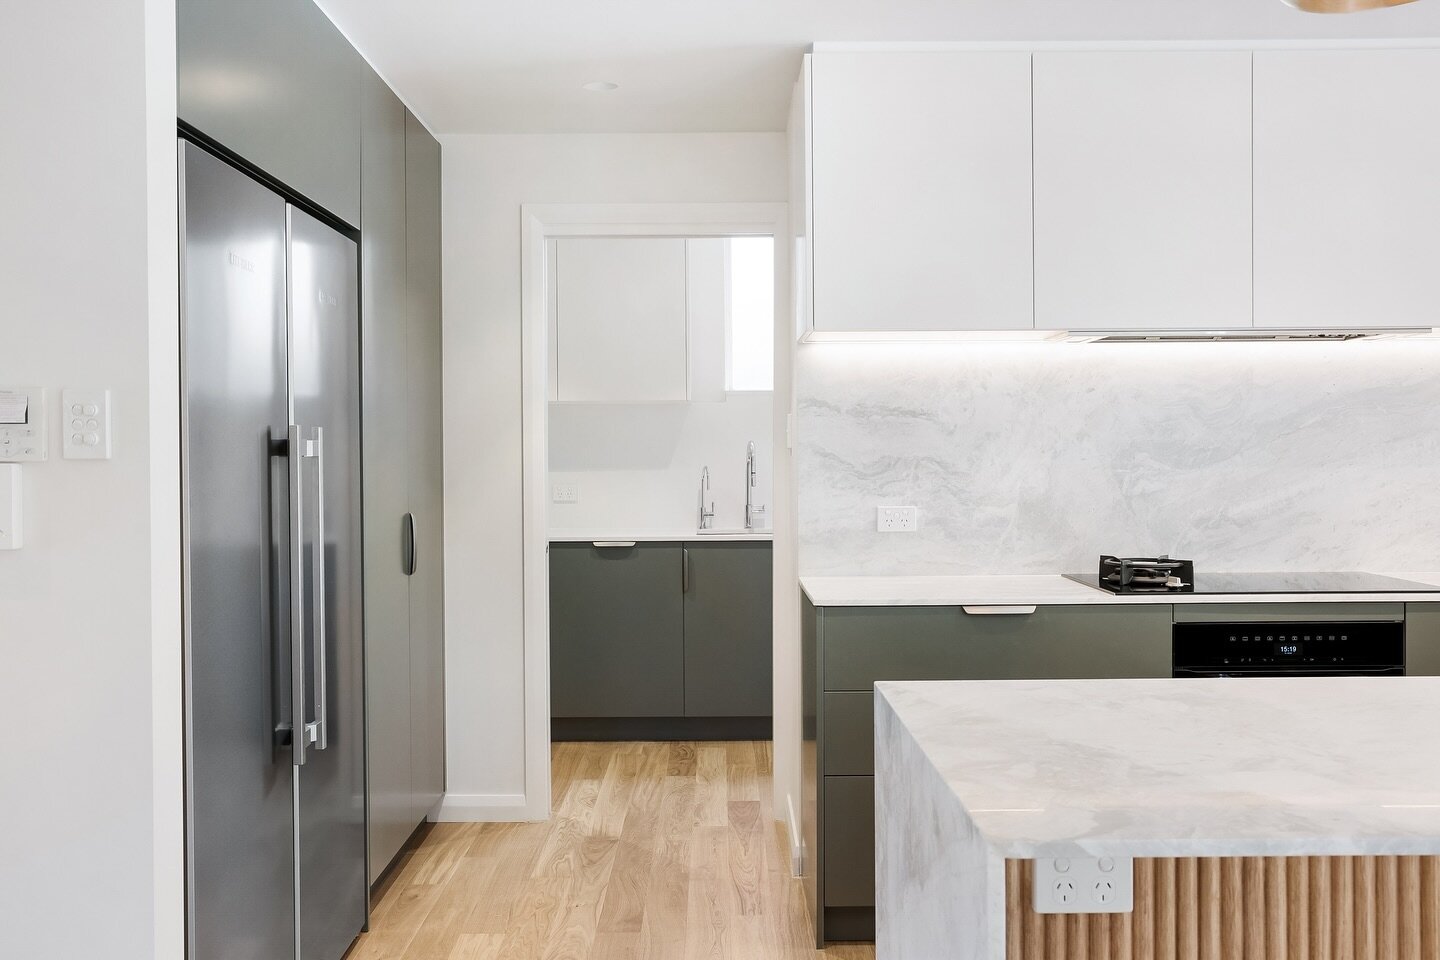 Completed Project | Willoughby, Sydney

A butlers pantry - a small kitchen within your kitchen area, usually out of sight. A butlers pantry&rsquo;s main purpose is to provide a space to prepare food and clean up without cluttering your main kitchen.
